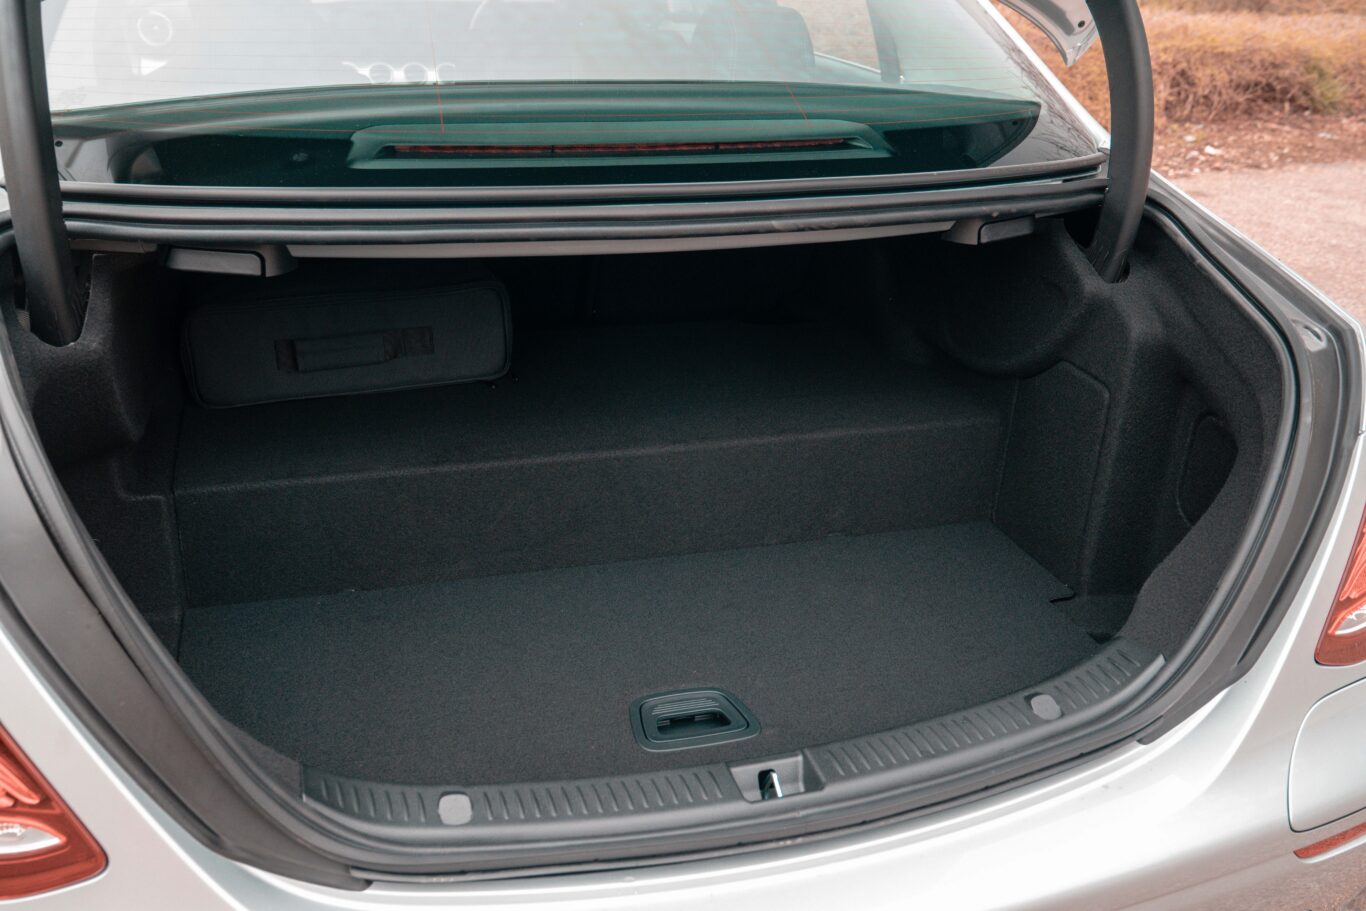 Boot space is reduced as a result of the batteries located in the boot floor